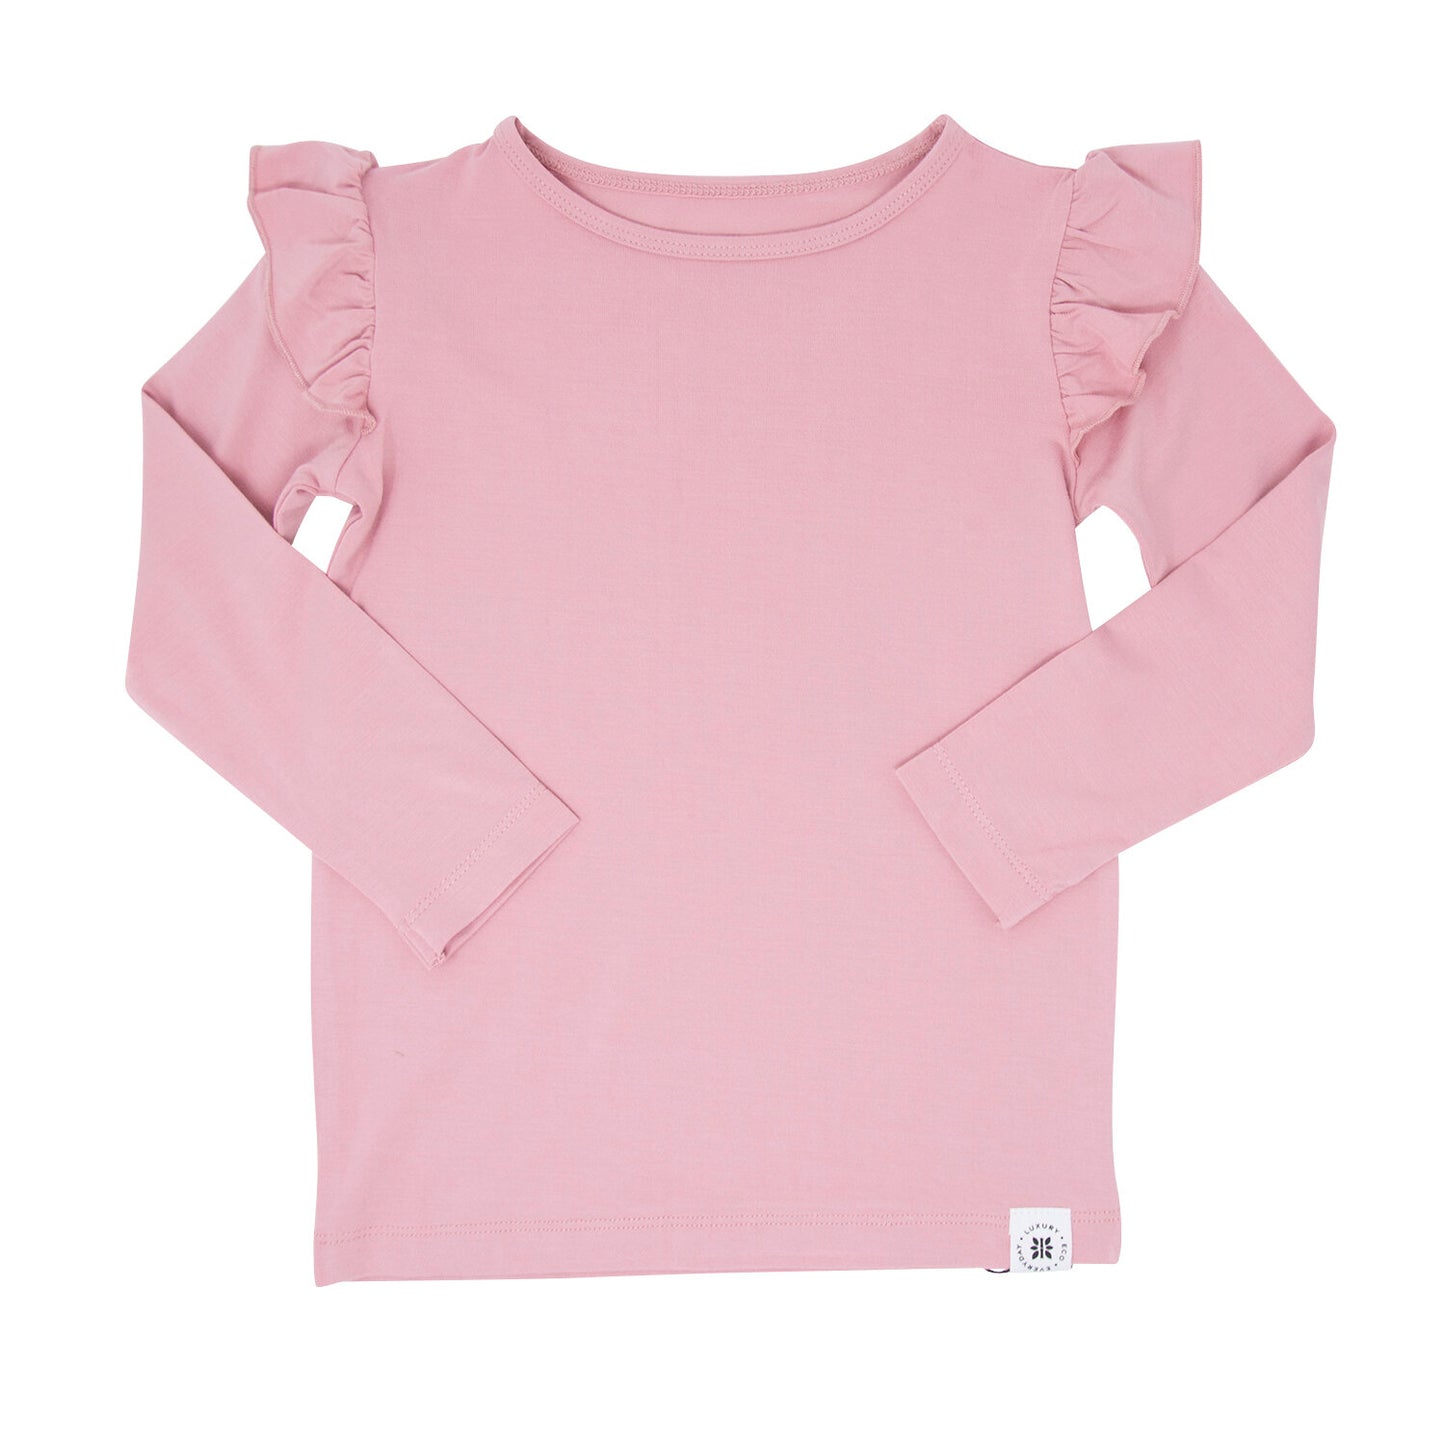 Pale Mauve Bamboo Ruffle Top Shirt. Get ready for each day with style and comfort in this adorable top. Pair with leggings for an easy outfit. Smooth, silky fabric and absolutely tag free! Wicking and anti-bacterial properties to keep little ones fresh, dry and cool. Made to be flexible for active lifestyles with our superbly soft yet durable bamboo fabric.  95% Bamboo Viscose, 5% Spandex. Machine washable and dryable!